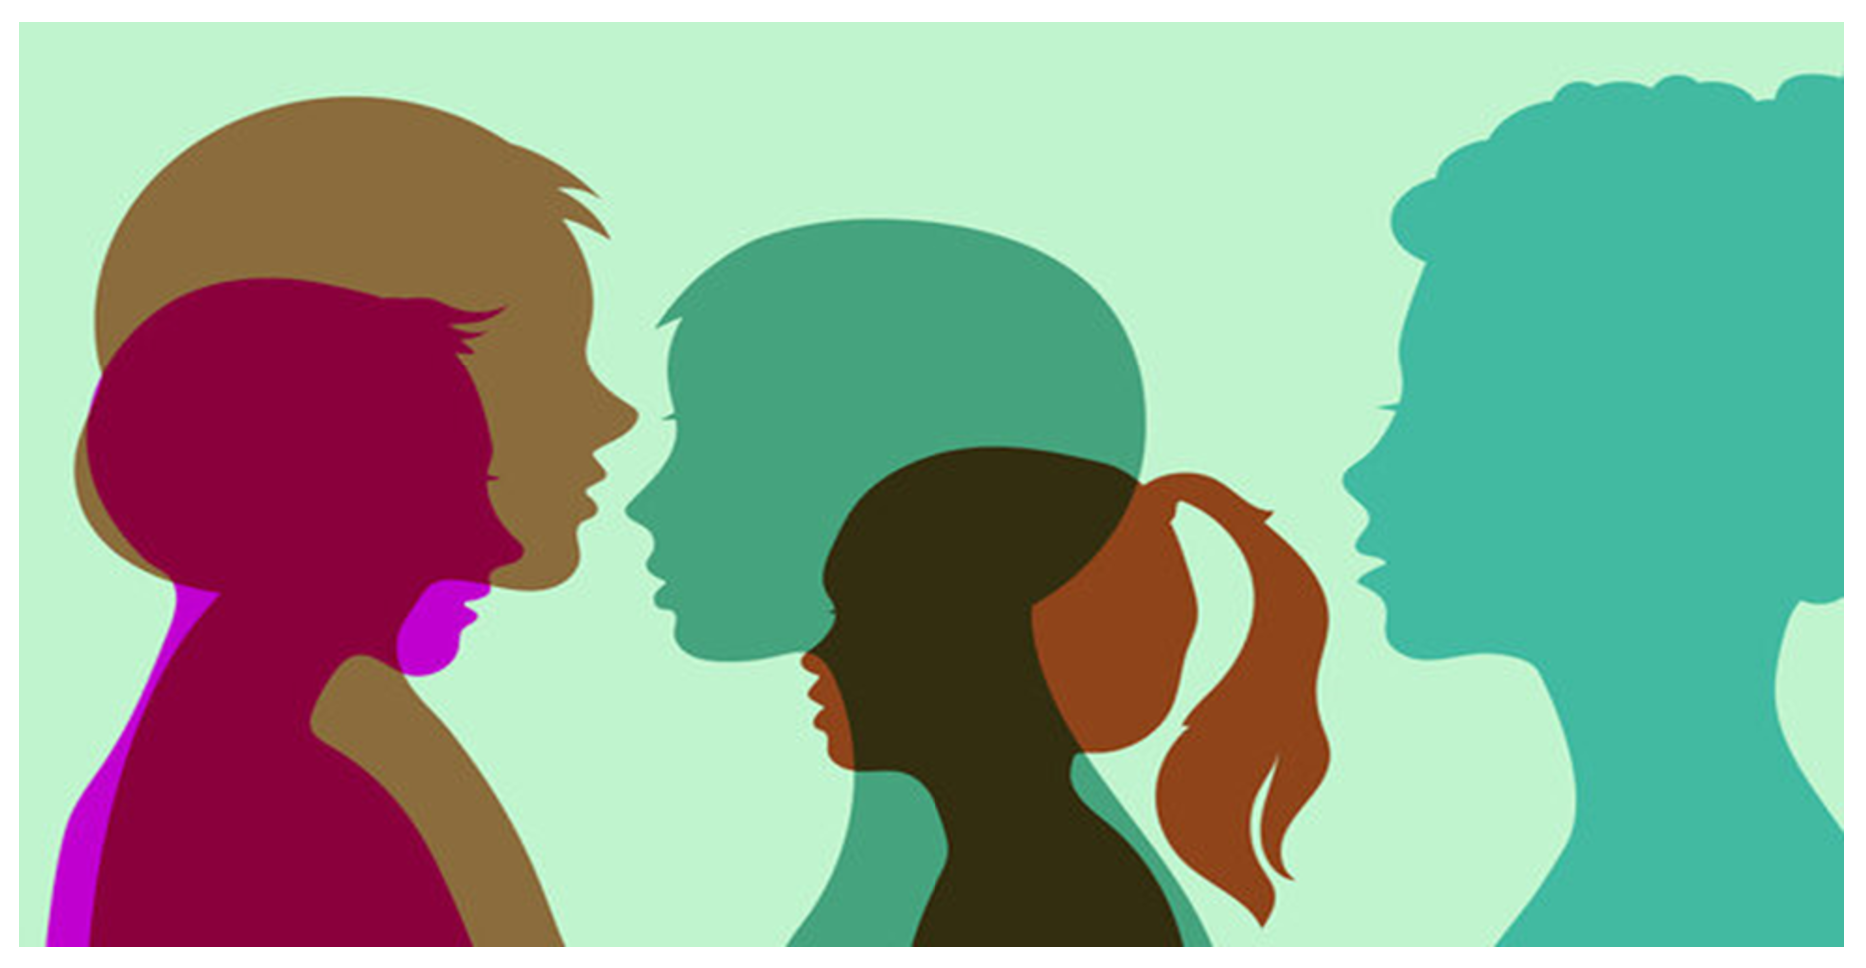 Overlay of colored shadows outlining various facial profiles.